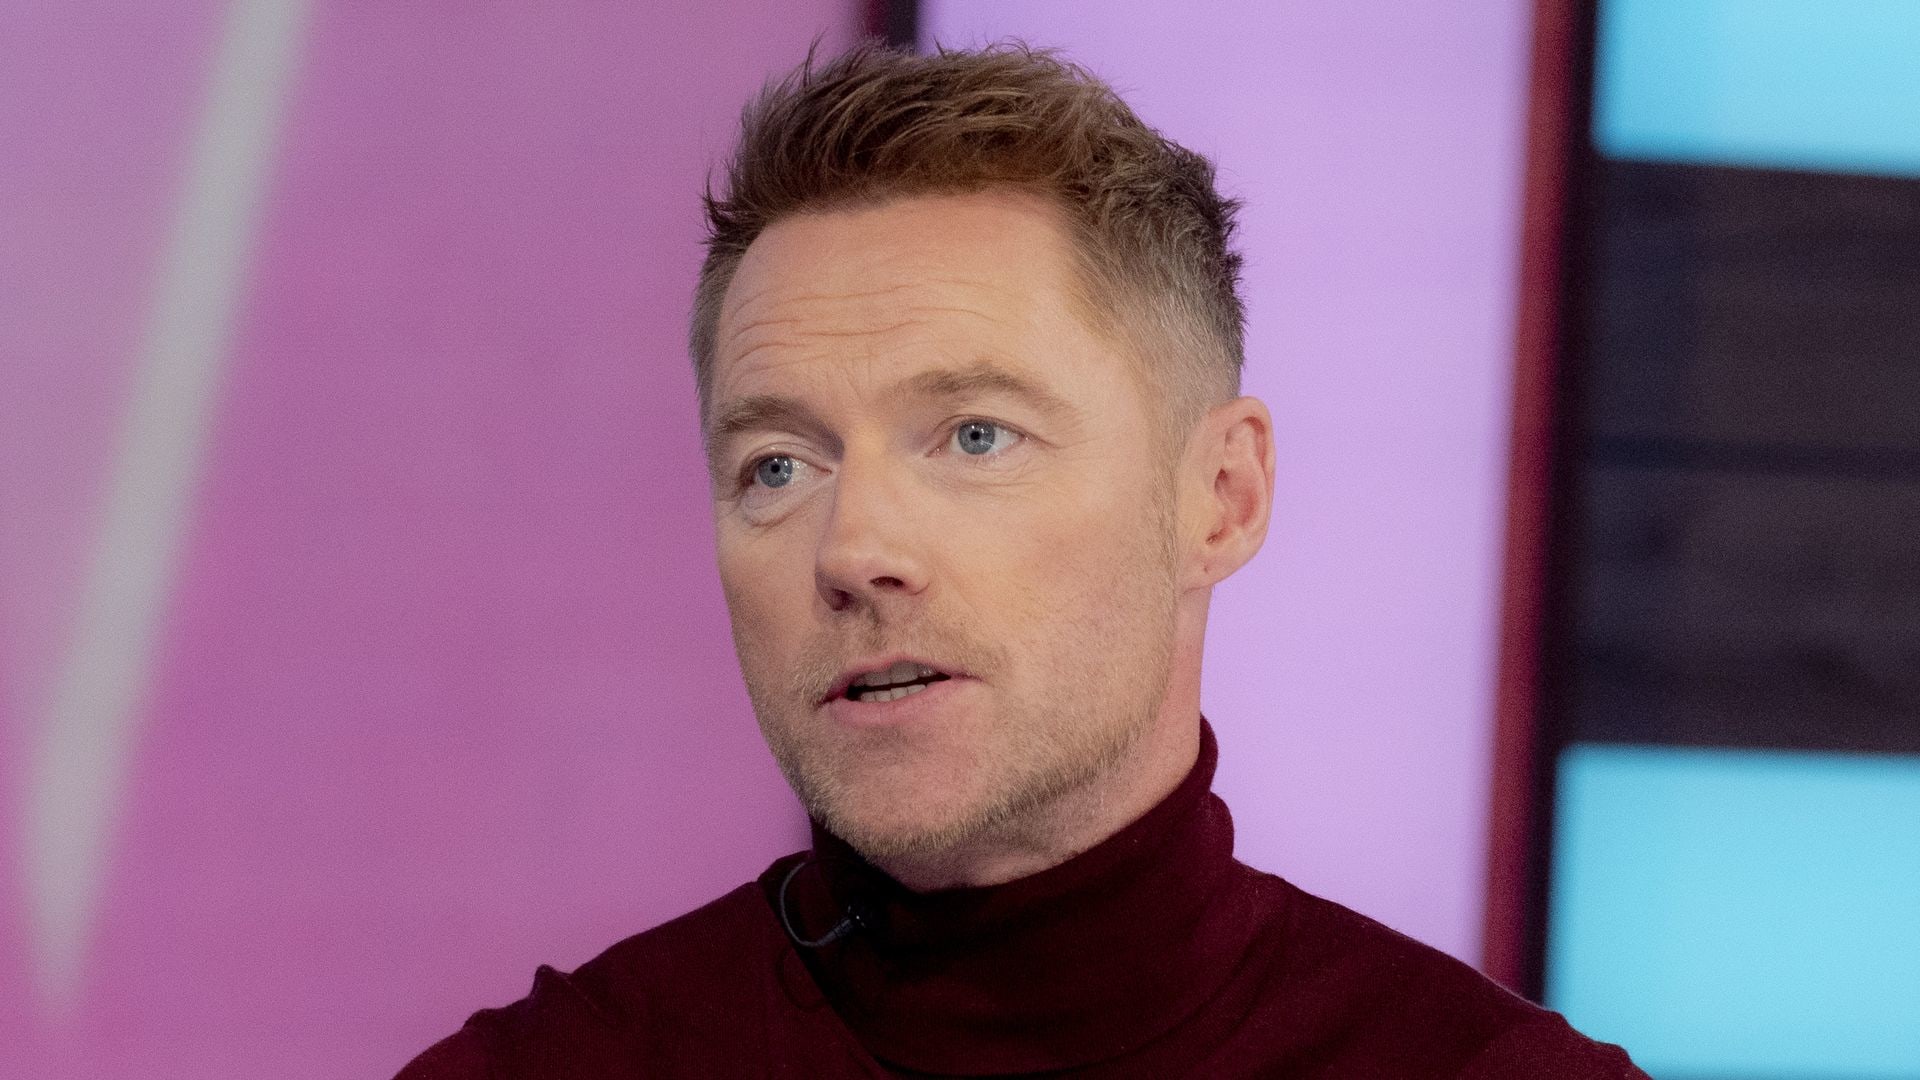 Ronan Keating announces abrupt exit from Magic Radio with emotional statement